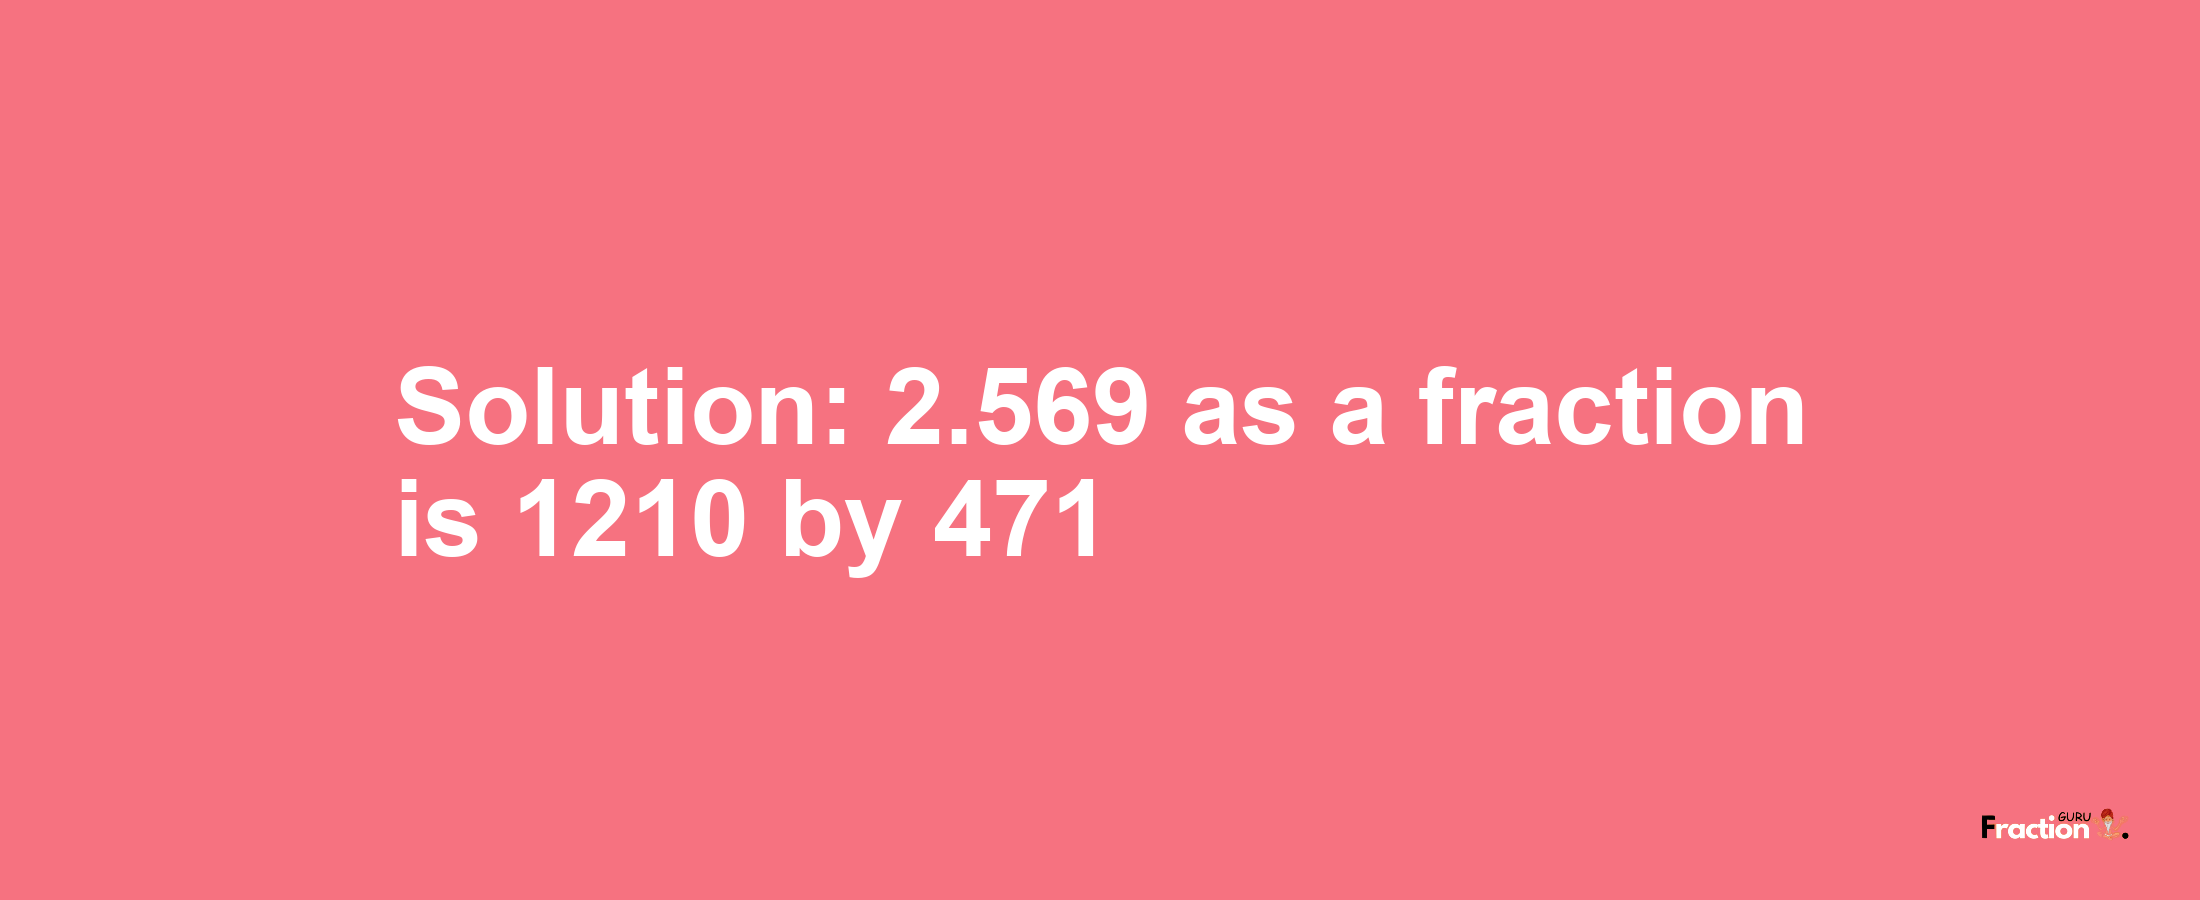 Solution:2.569 as a fraction is 1210/471